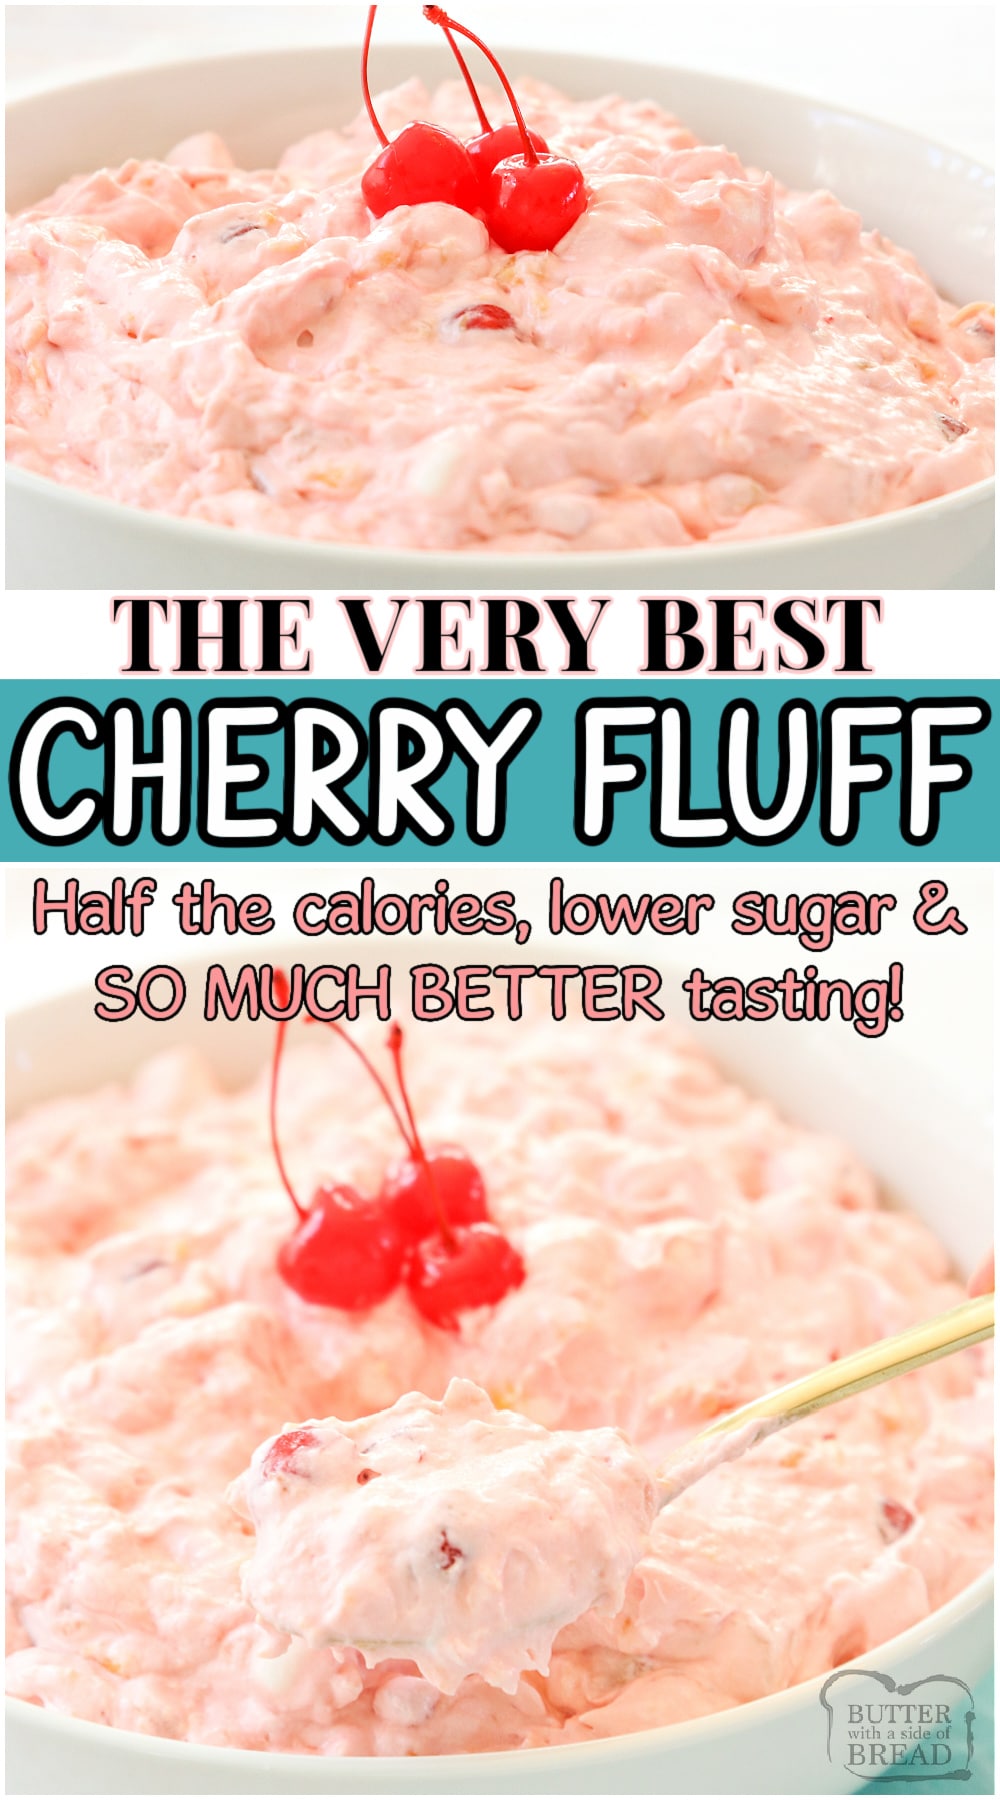 The BEST Cherry Fluff salad recipe ever! Perfectly creamy, not too sweet with tons of bright, cherry flavor. HALF the calories, done in a matter of minutes & ready to serve immediately!